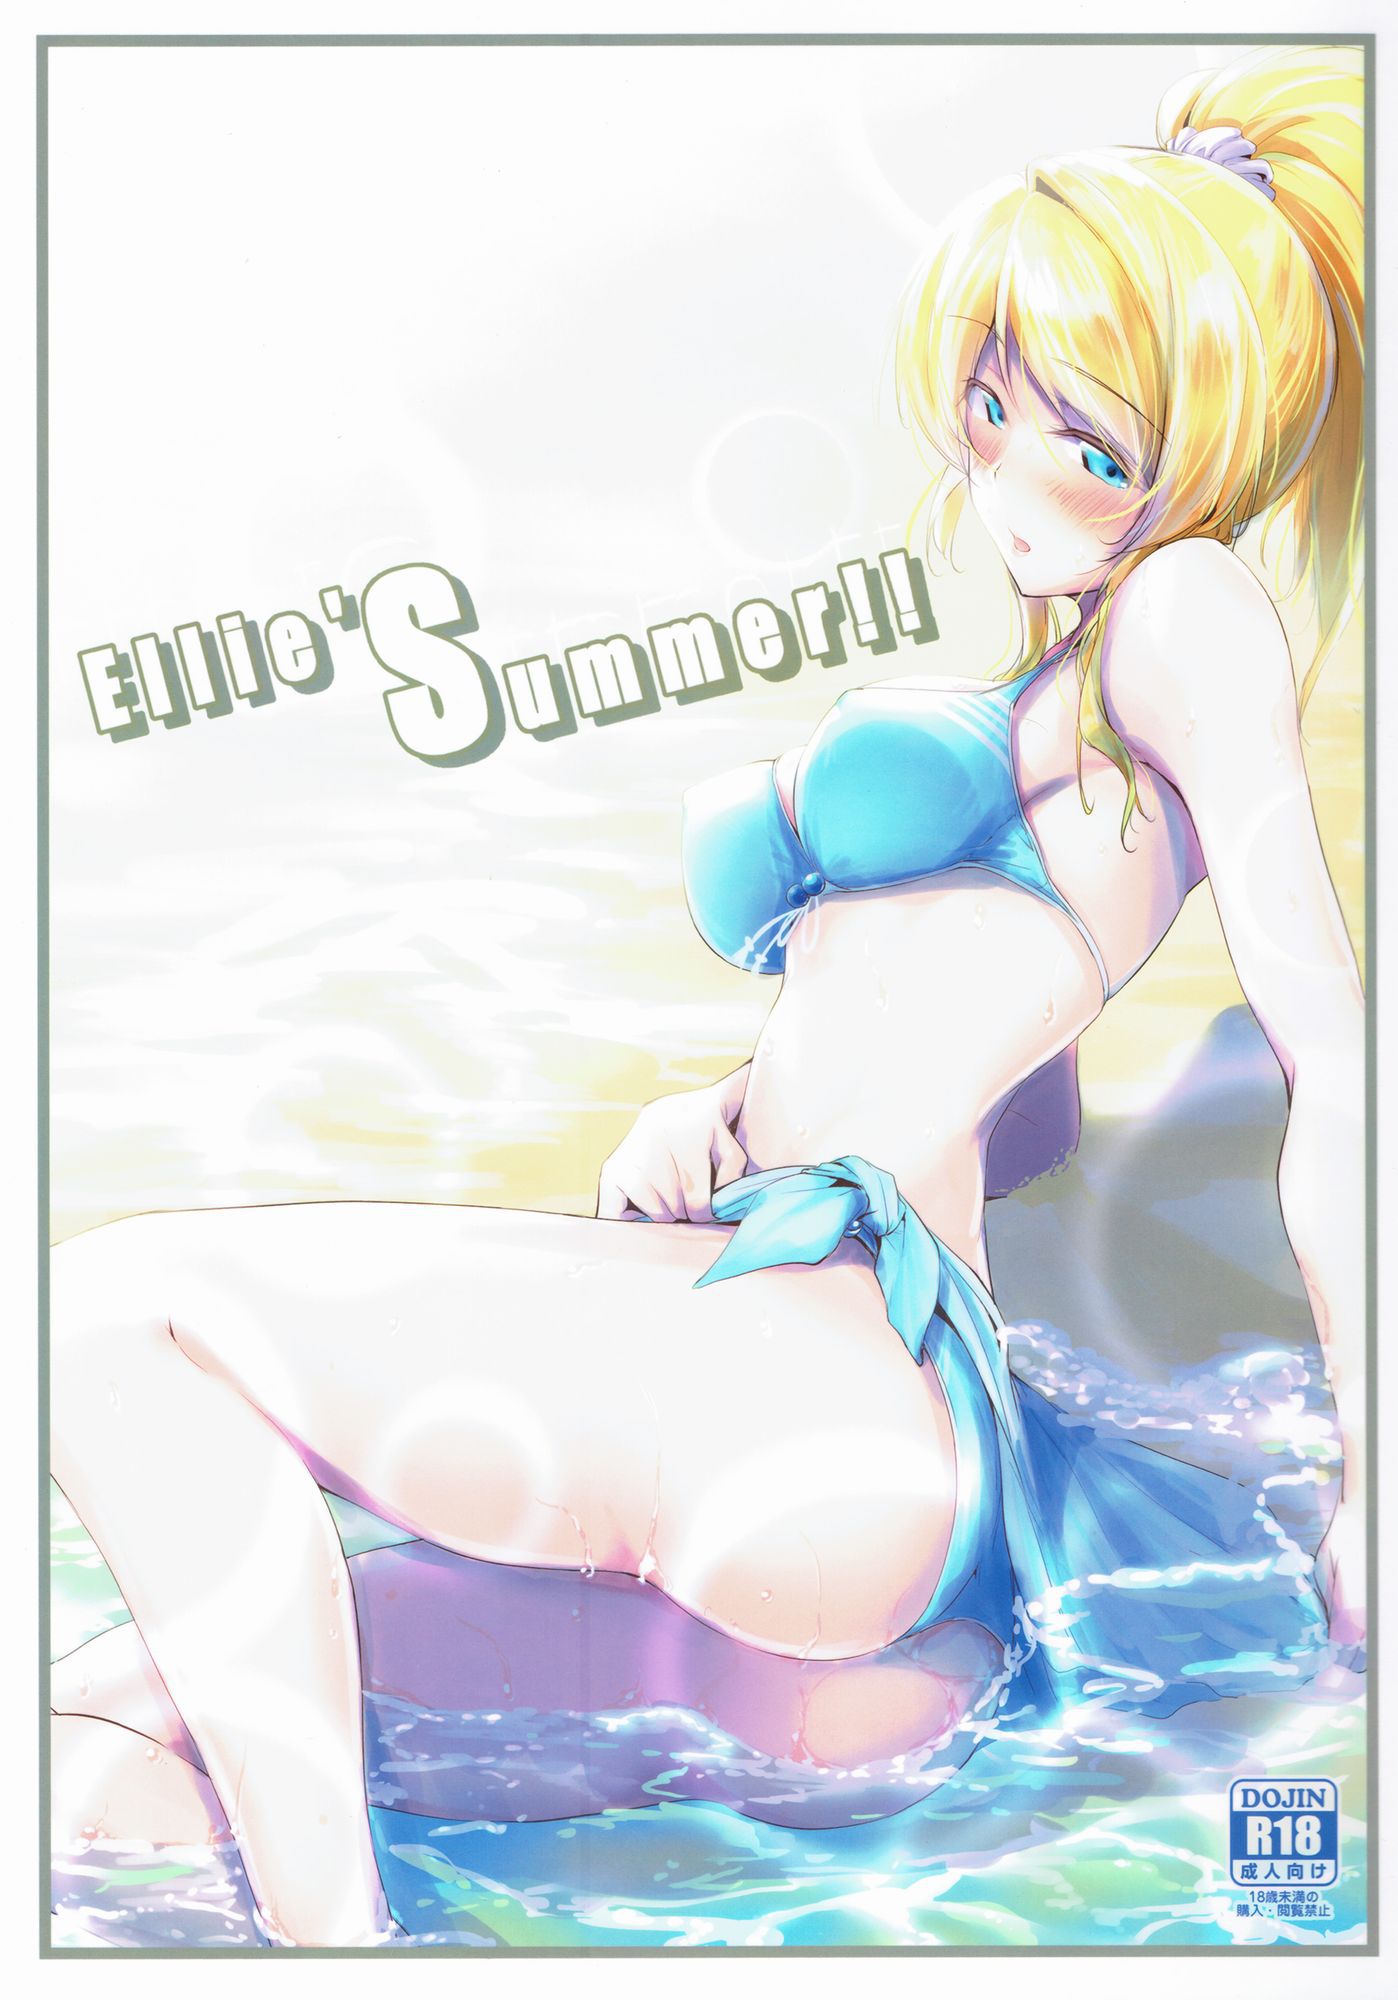 [Love Live! ] Erotic images that stick through with Ayase Eri's etch 12